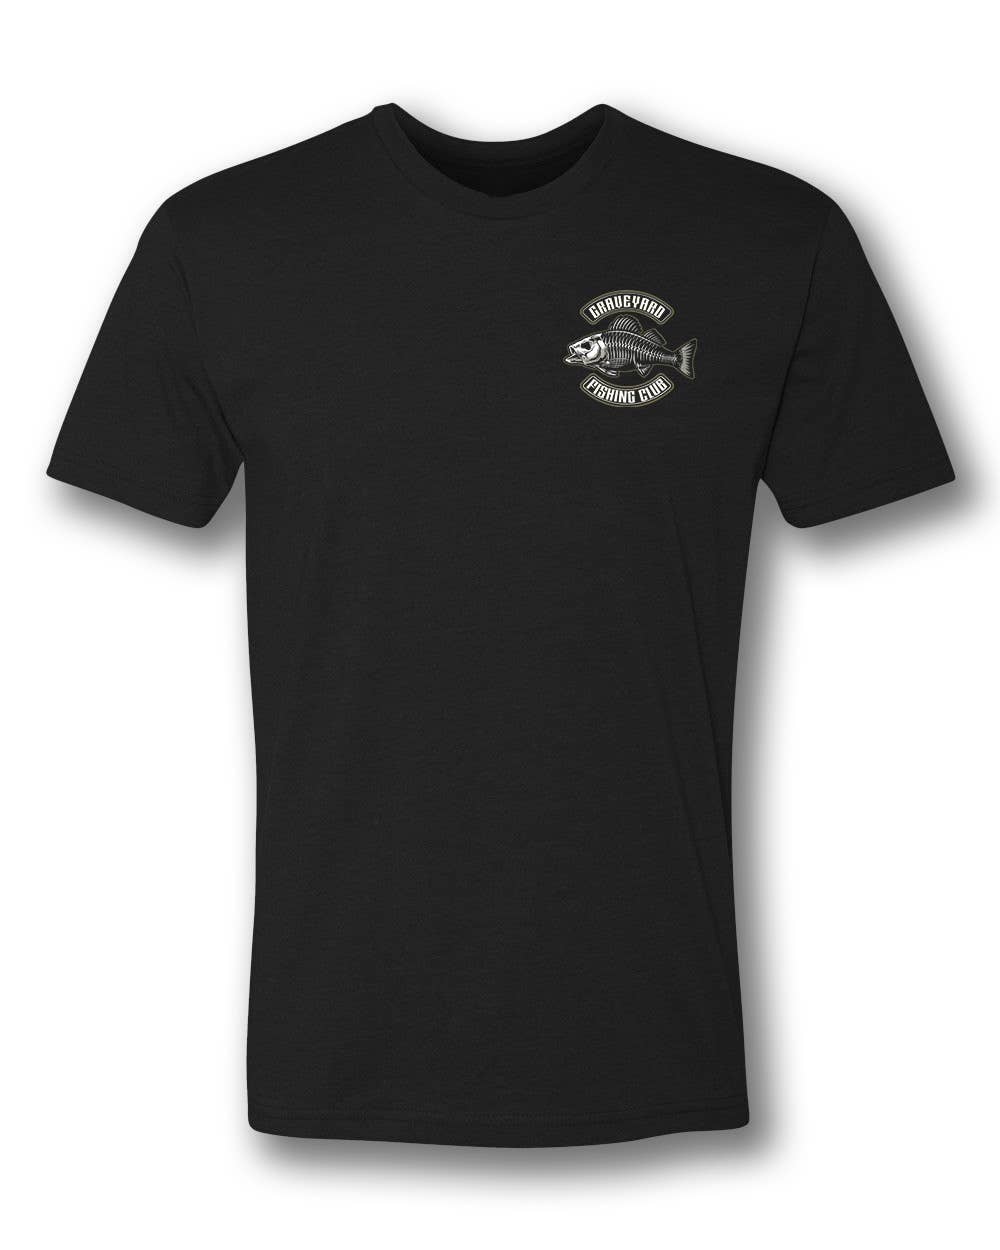 Fishing Club Tee - Rise and Redemption